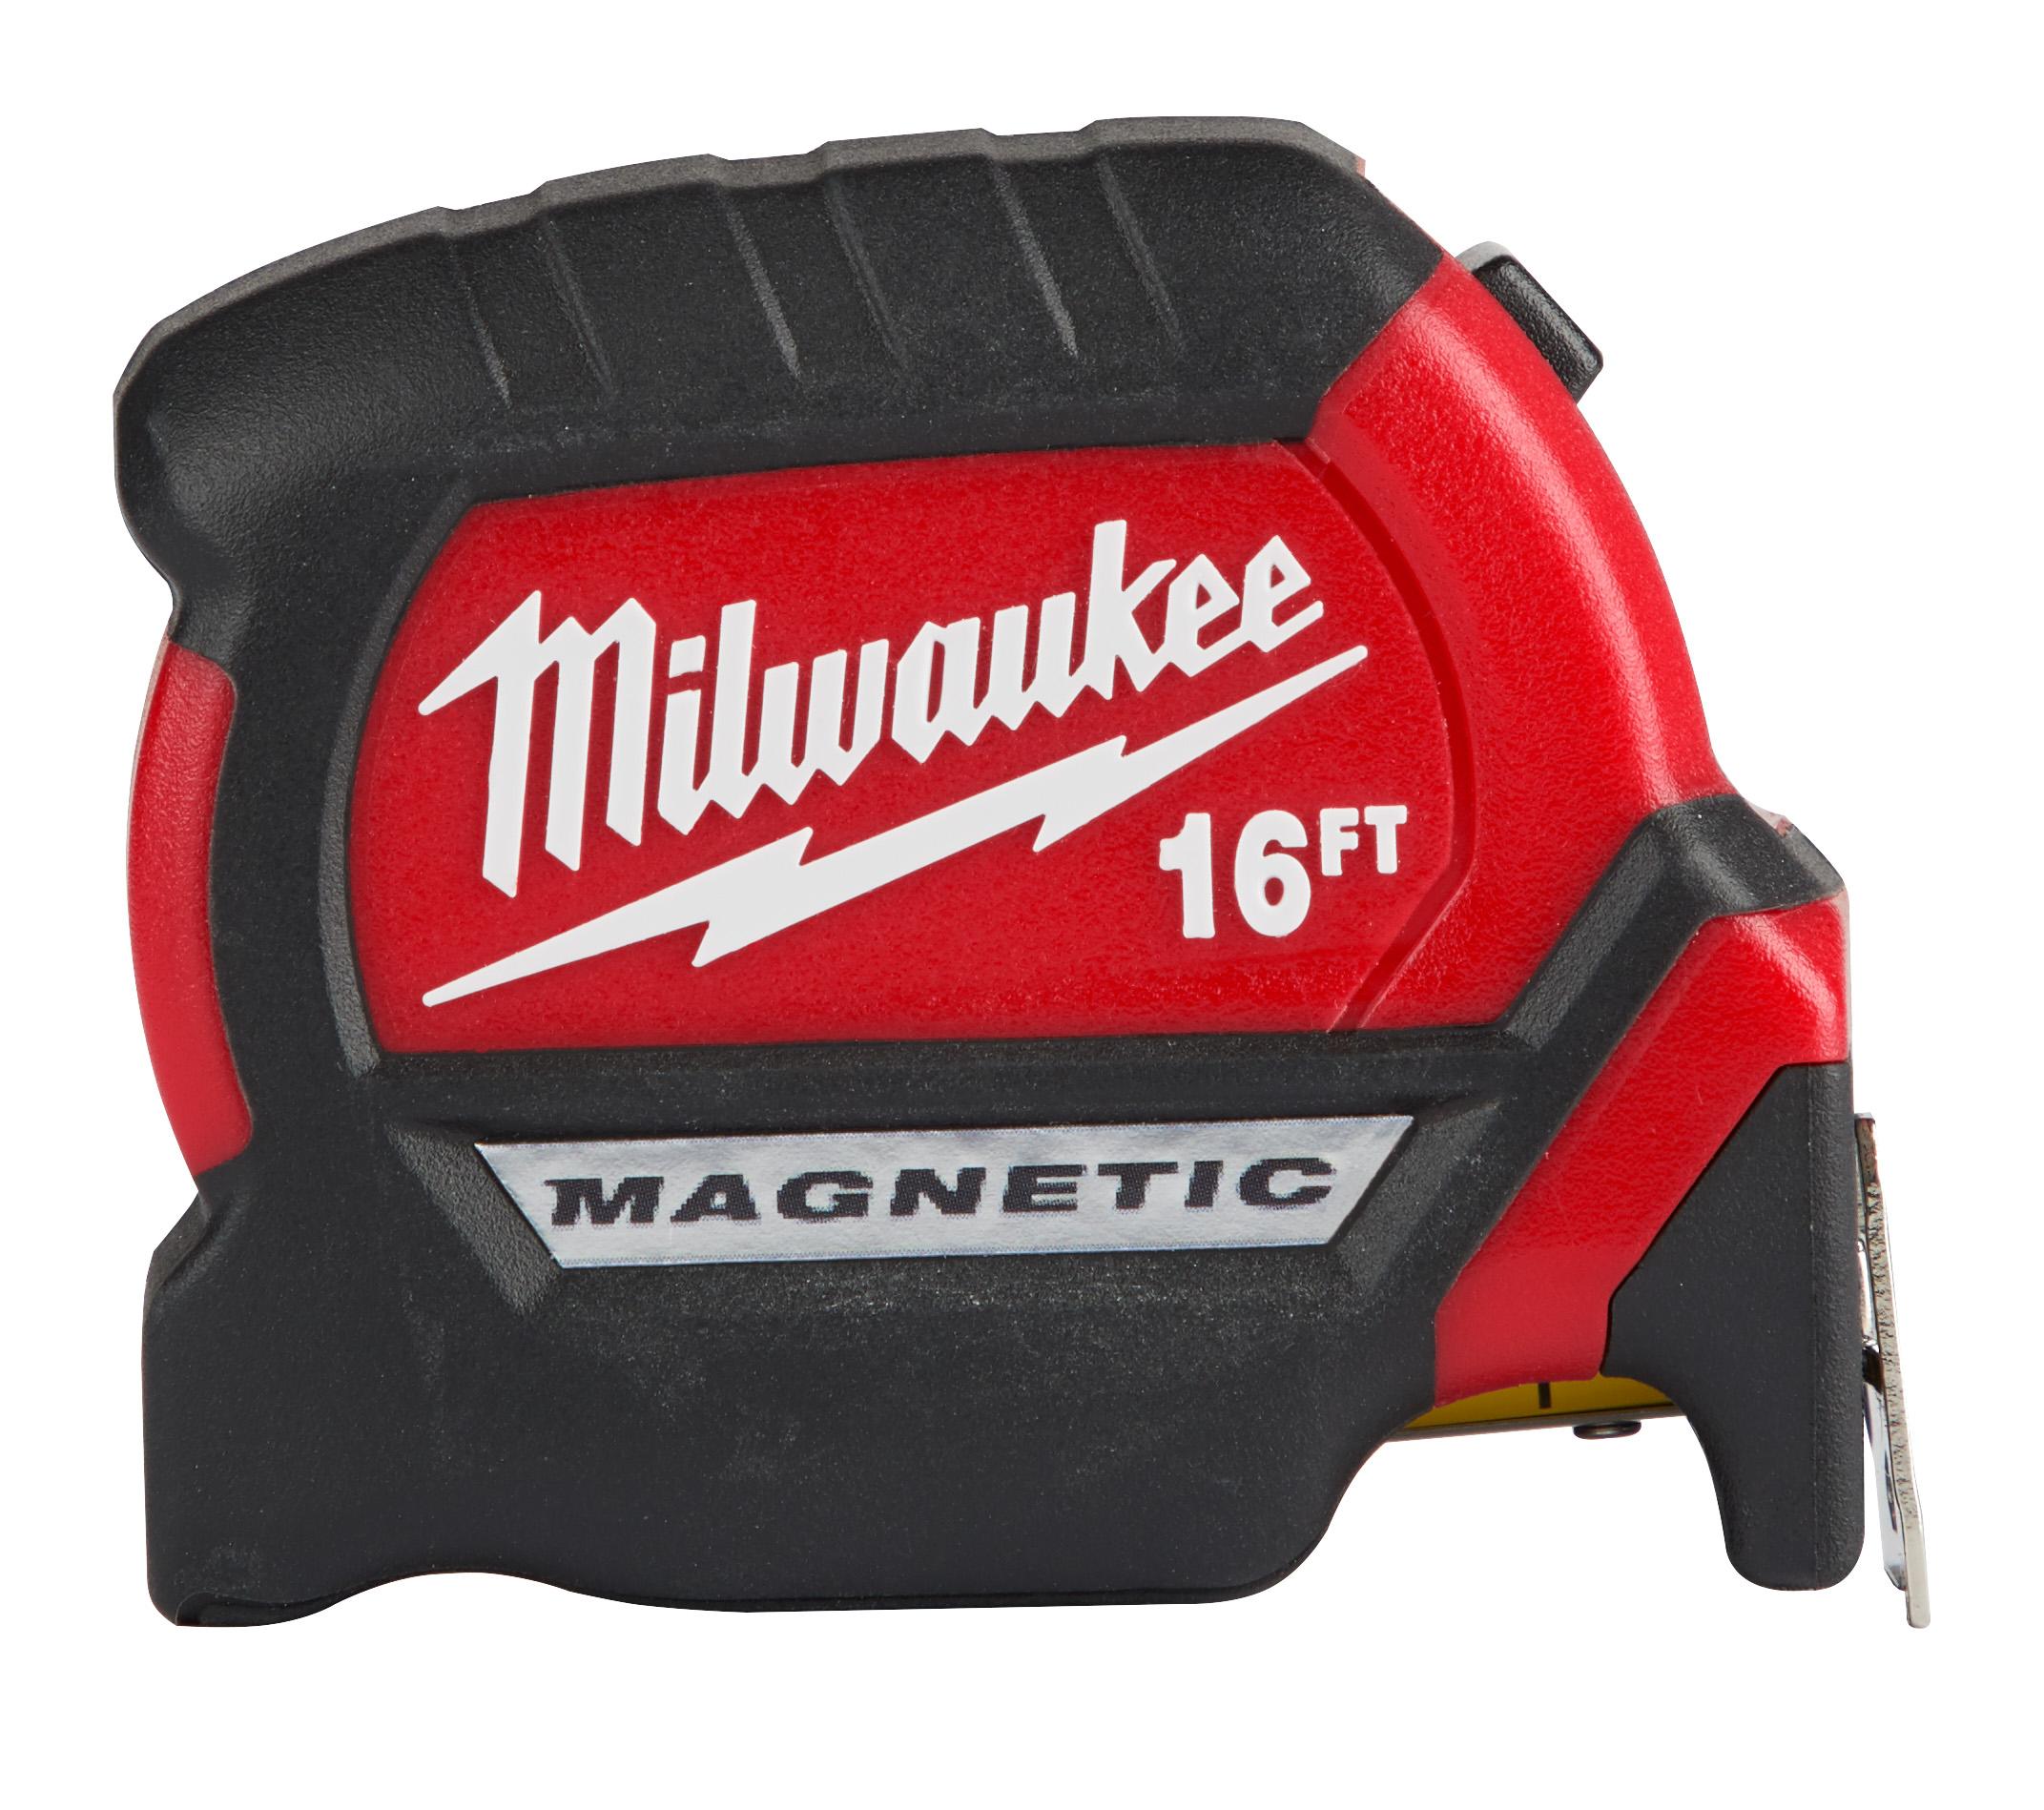 Milwaukee® 48-22-0316 Compact Magnetic Wide Measuring Tape With Belt Clip, 16 ft L x 1 in W Blade, Steel Blade, 1/16 in, 1/8 in, 1/4 in, 1/2 in, 1 ft Graduation